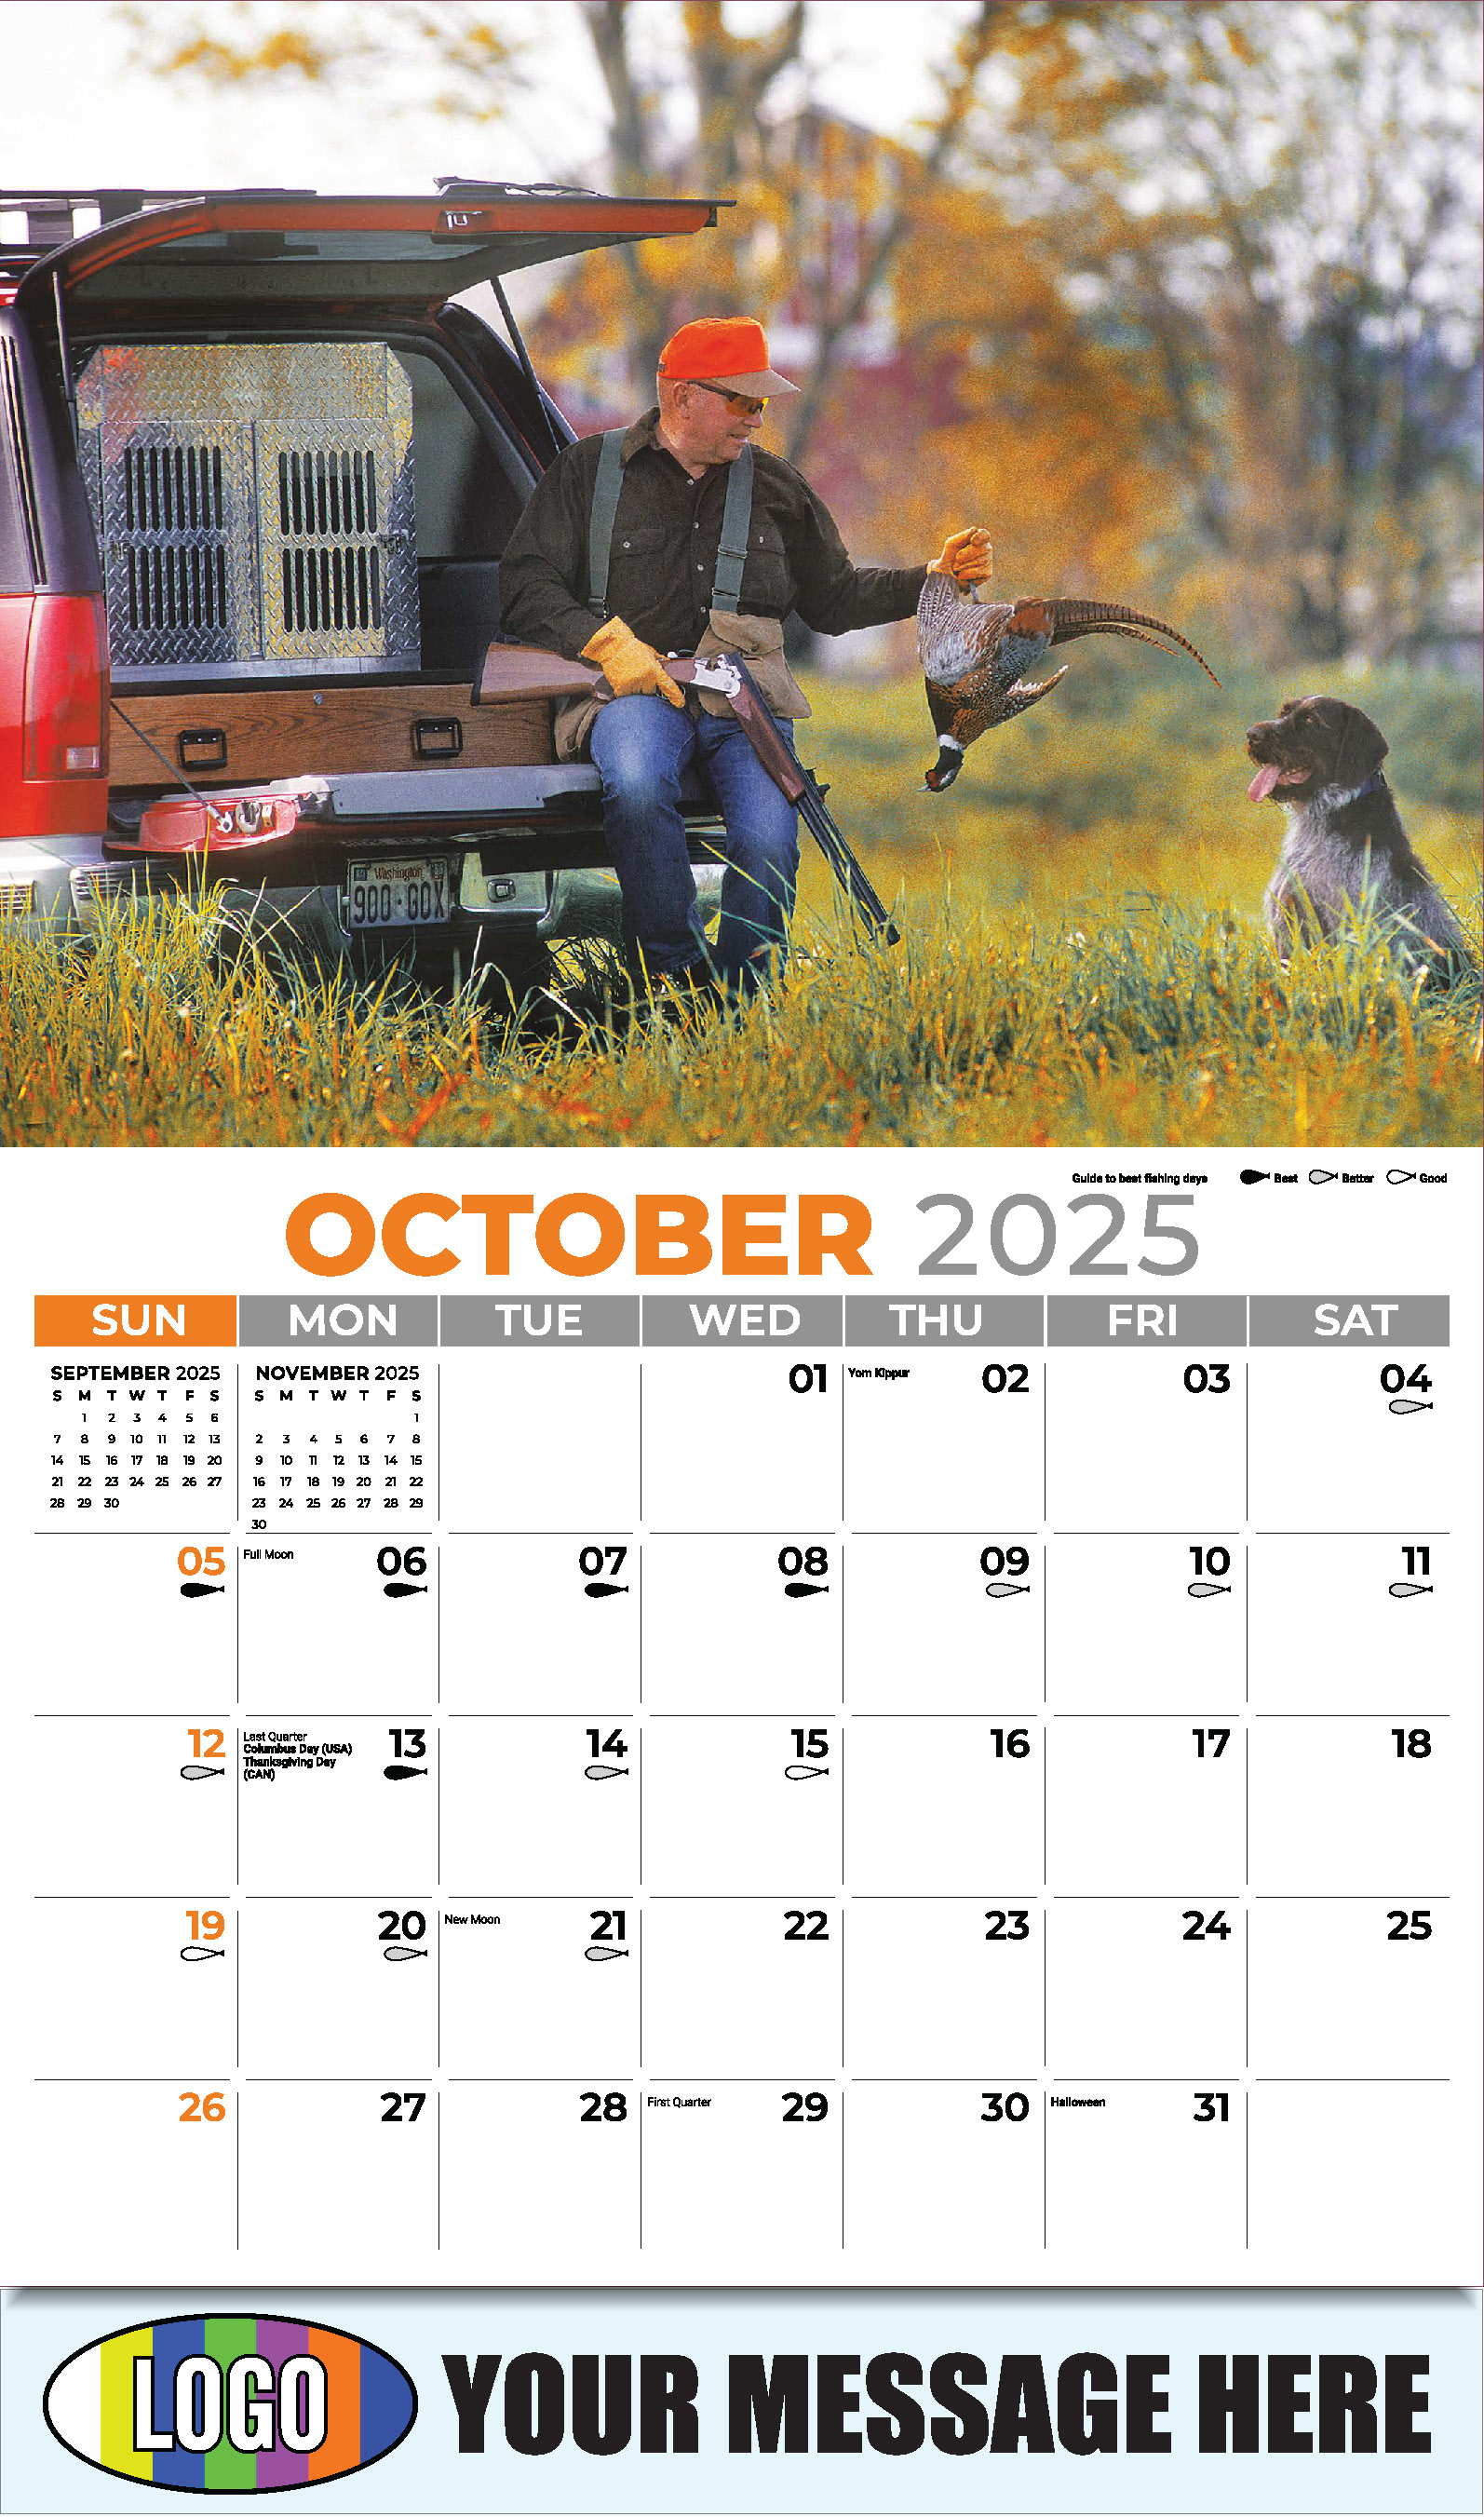 Fishing and Hunting 2025 Business Promotion Calendar - October